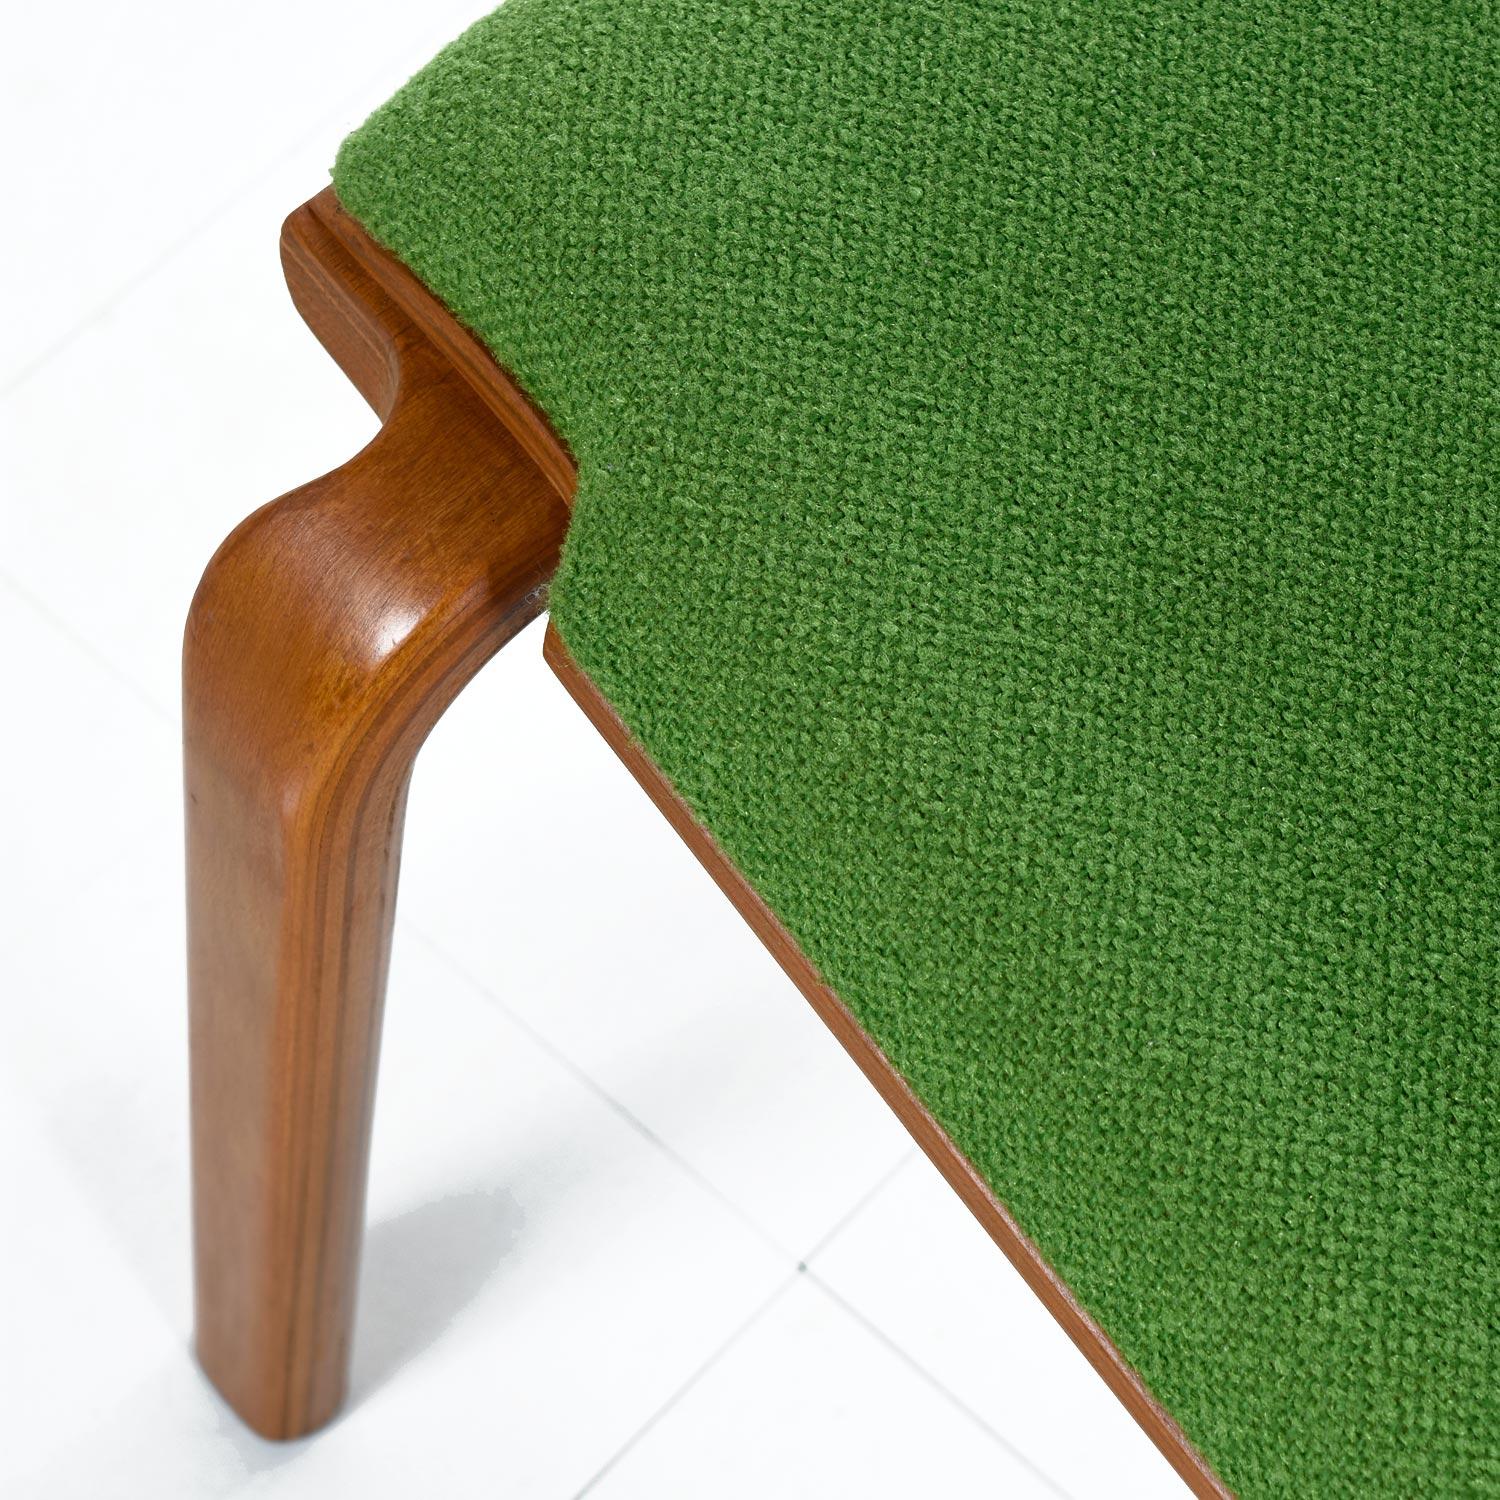 Thonet Style Mid-Century Modern Maple Bent Ply Green Wool Tweed Dining Chair Set 4